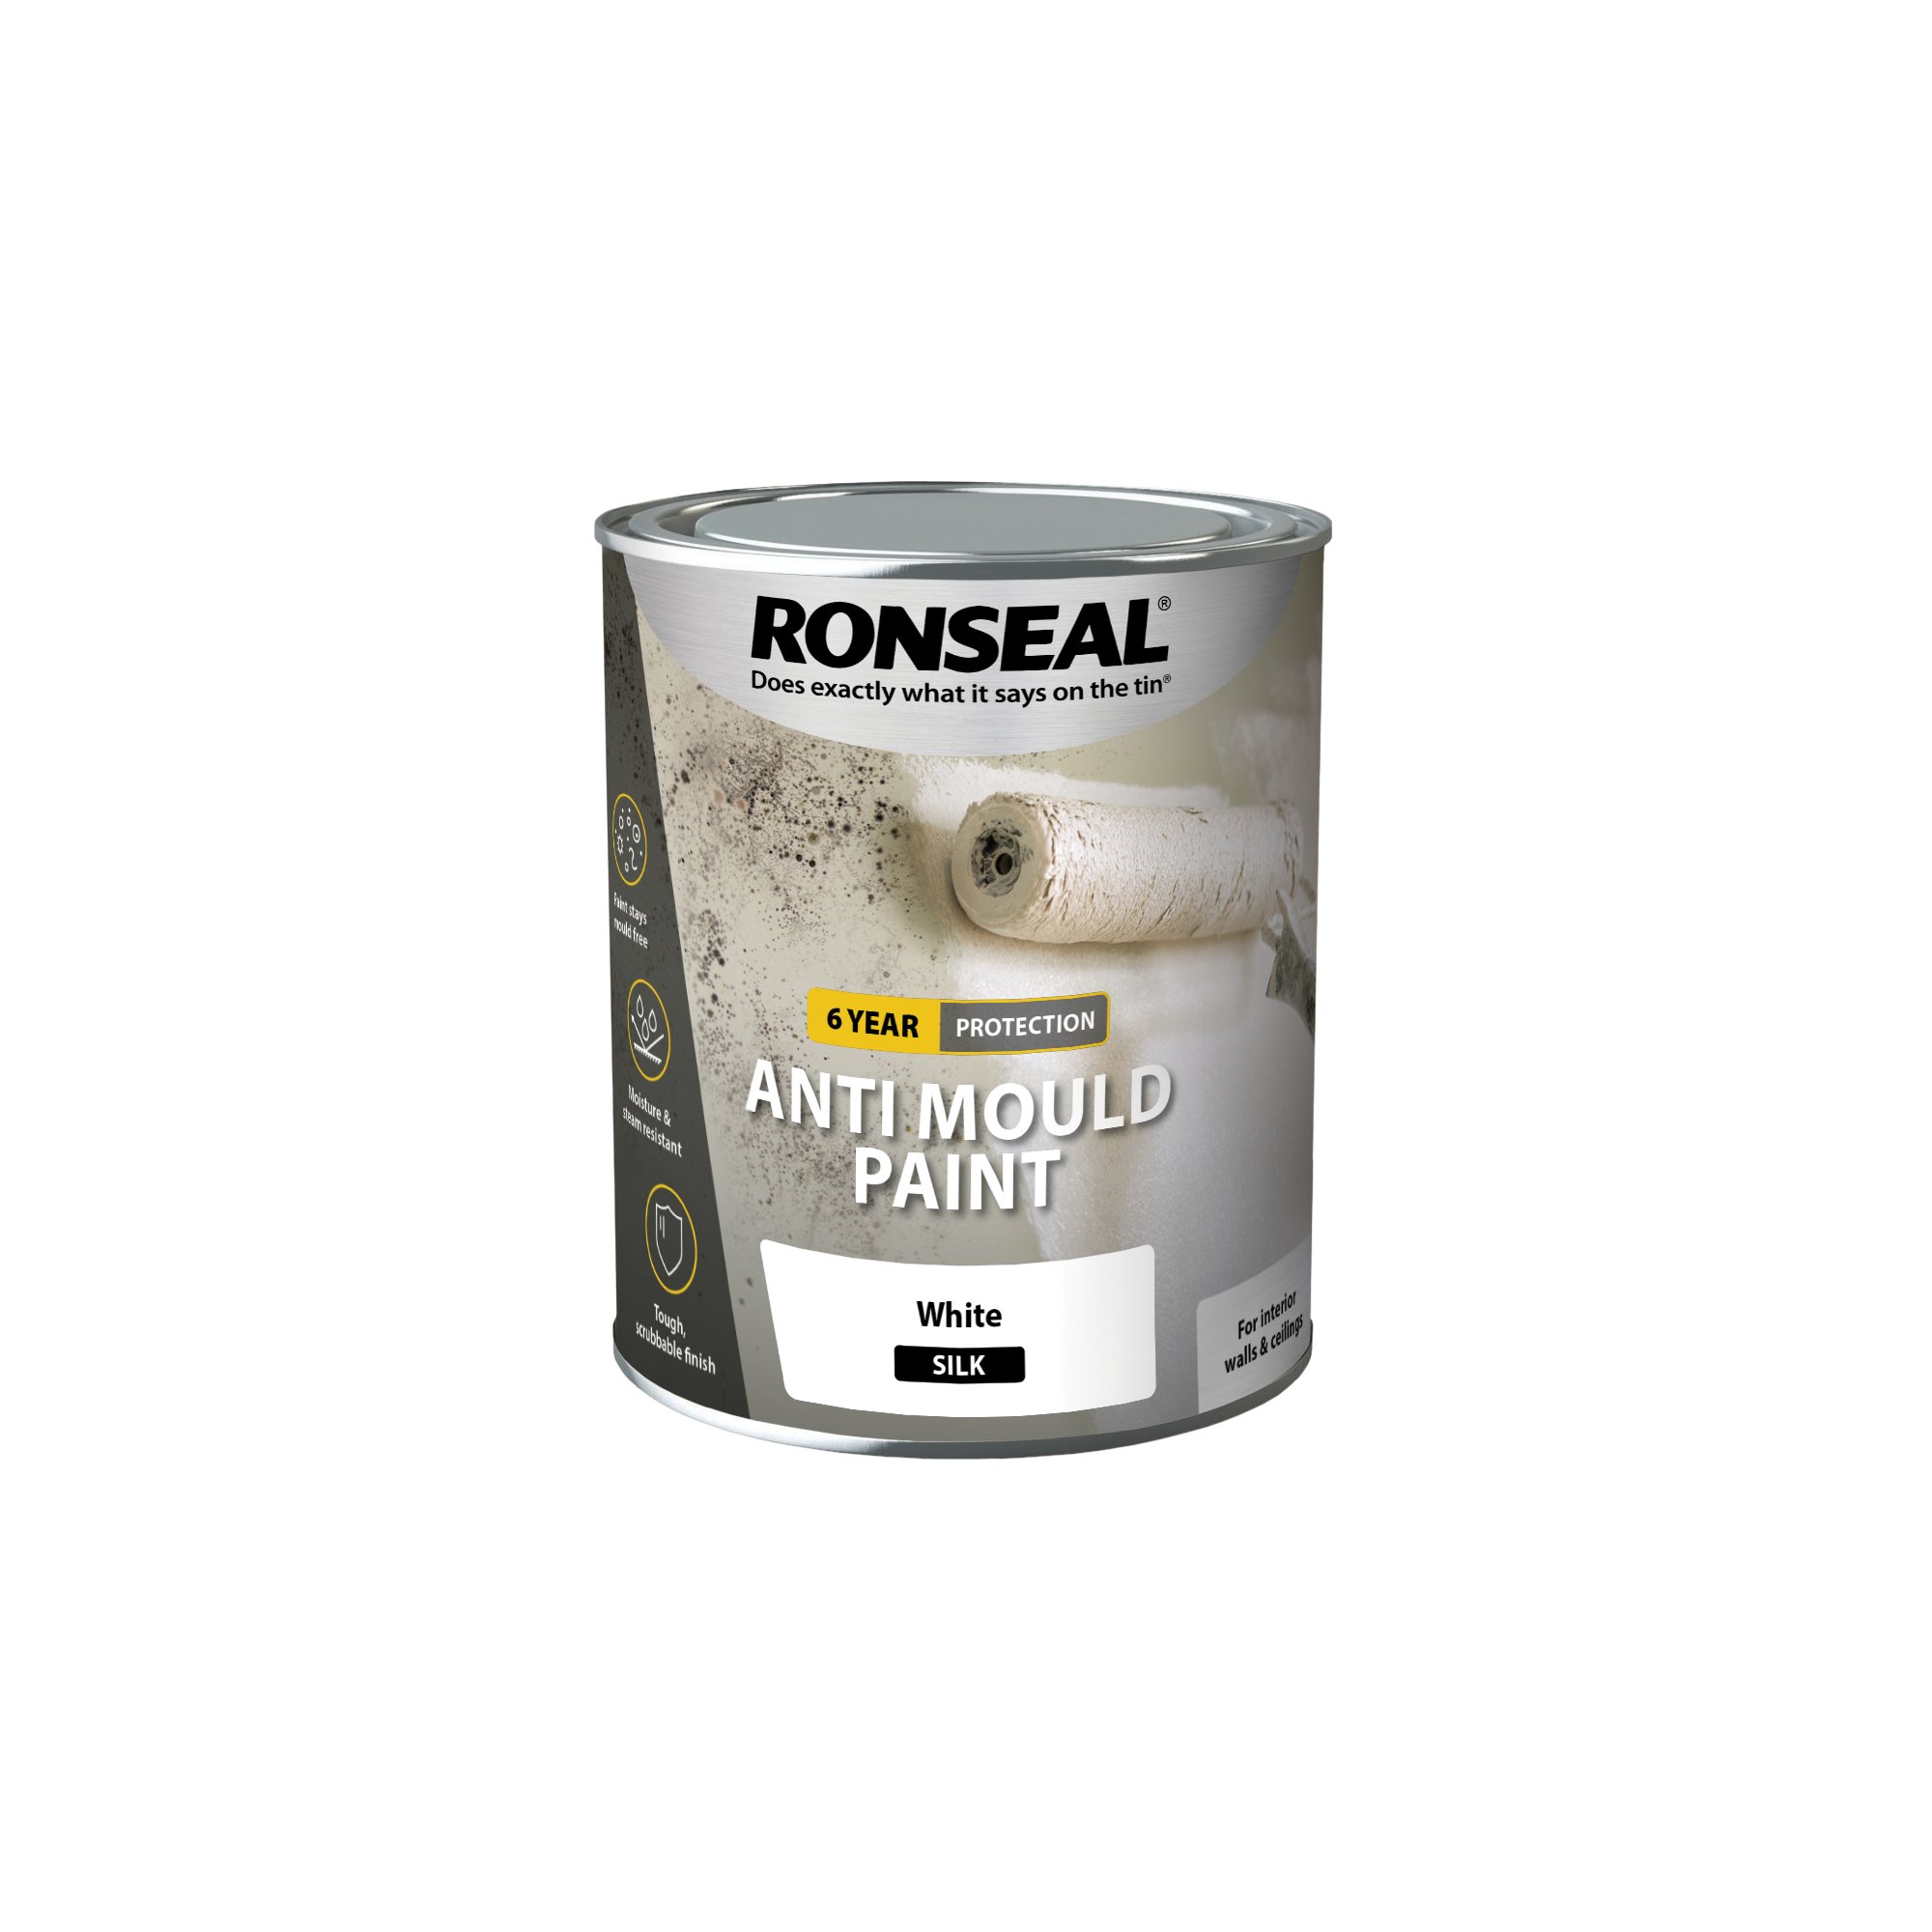 Ronseal 6 Year Anti Mould Paint Silk 750ml